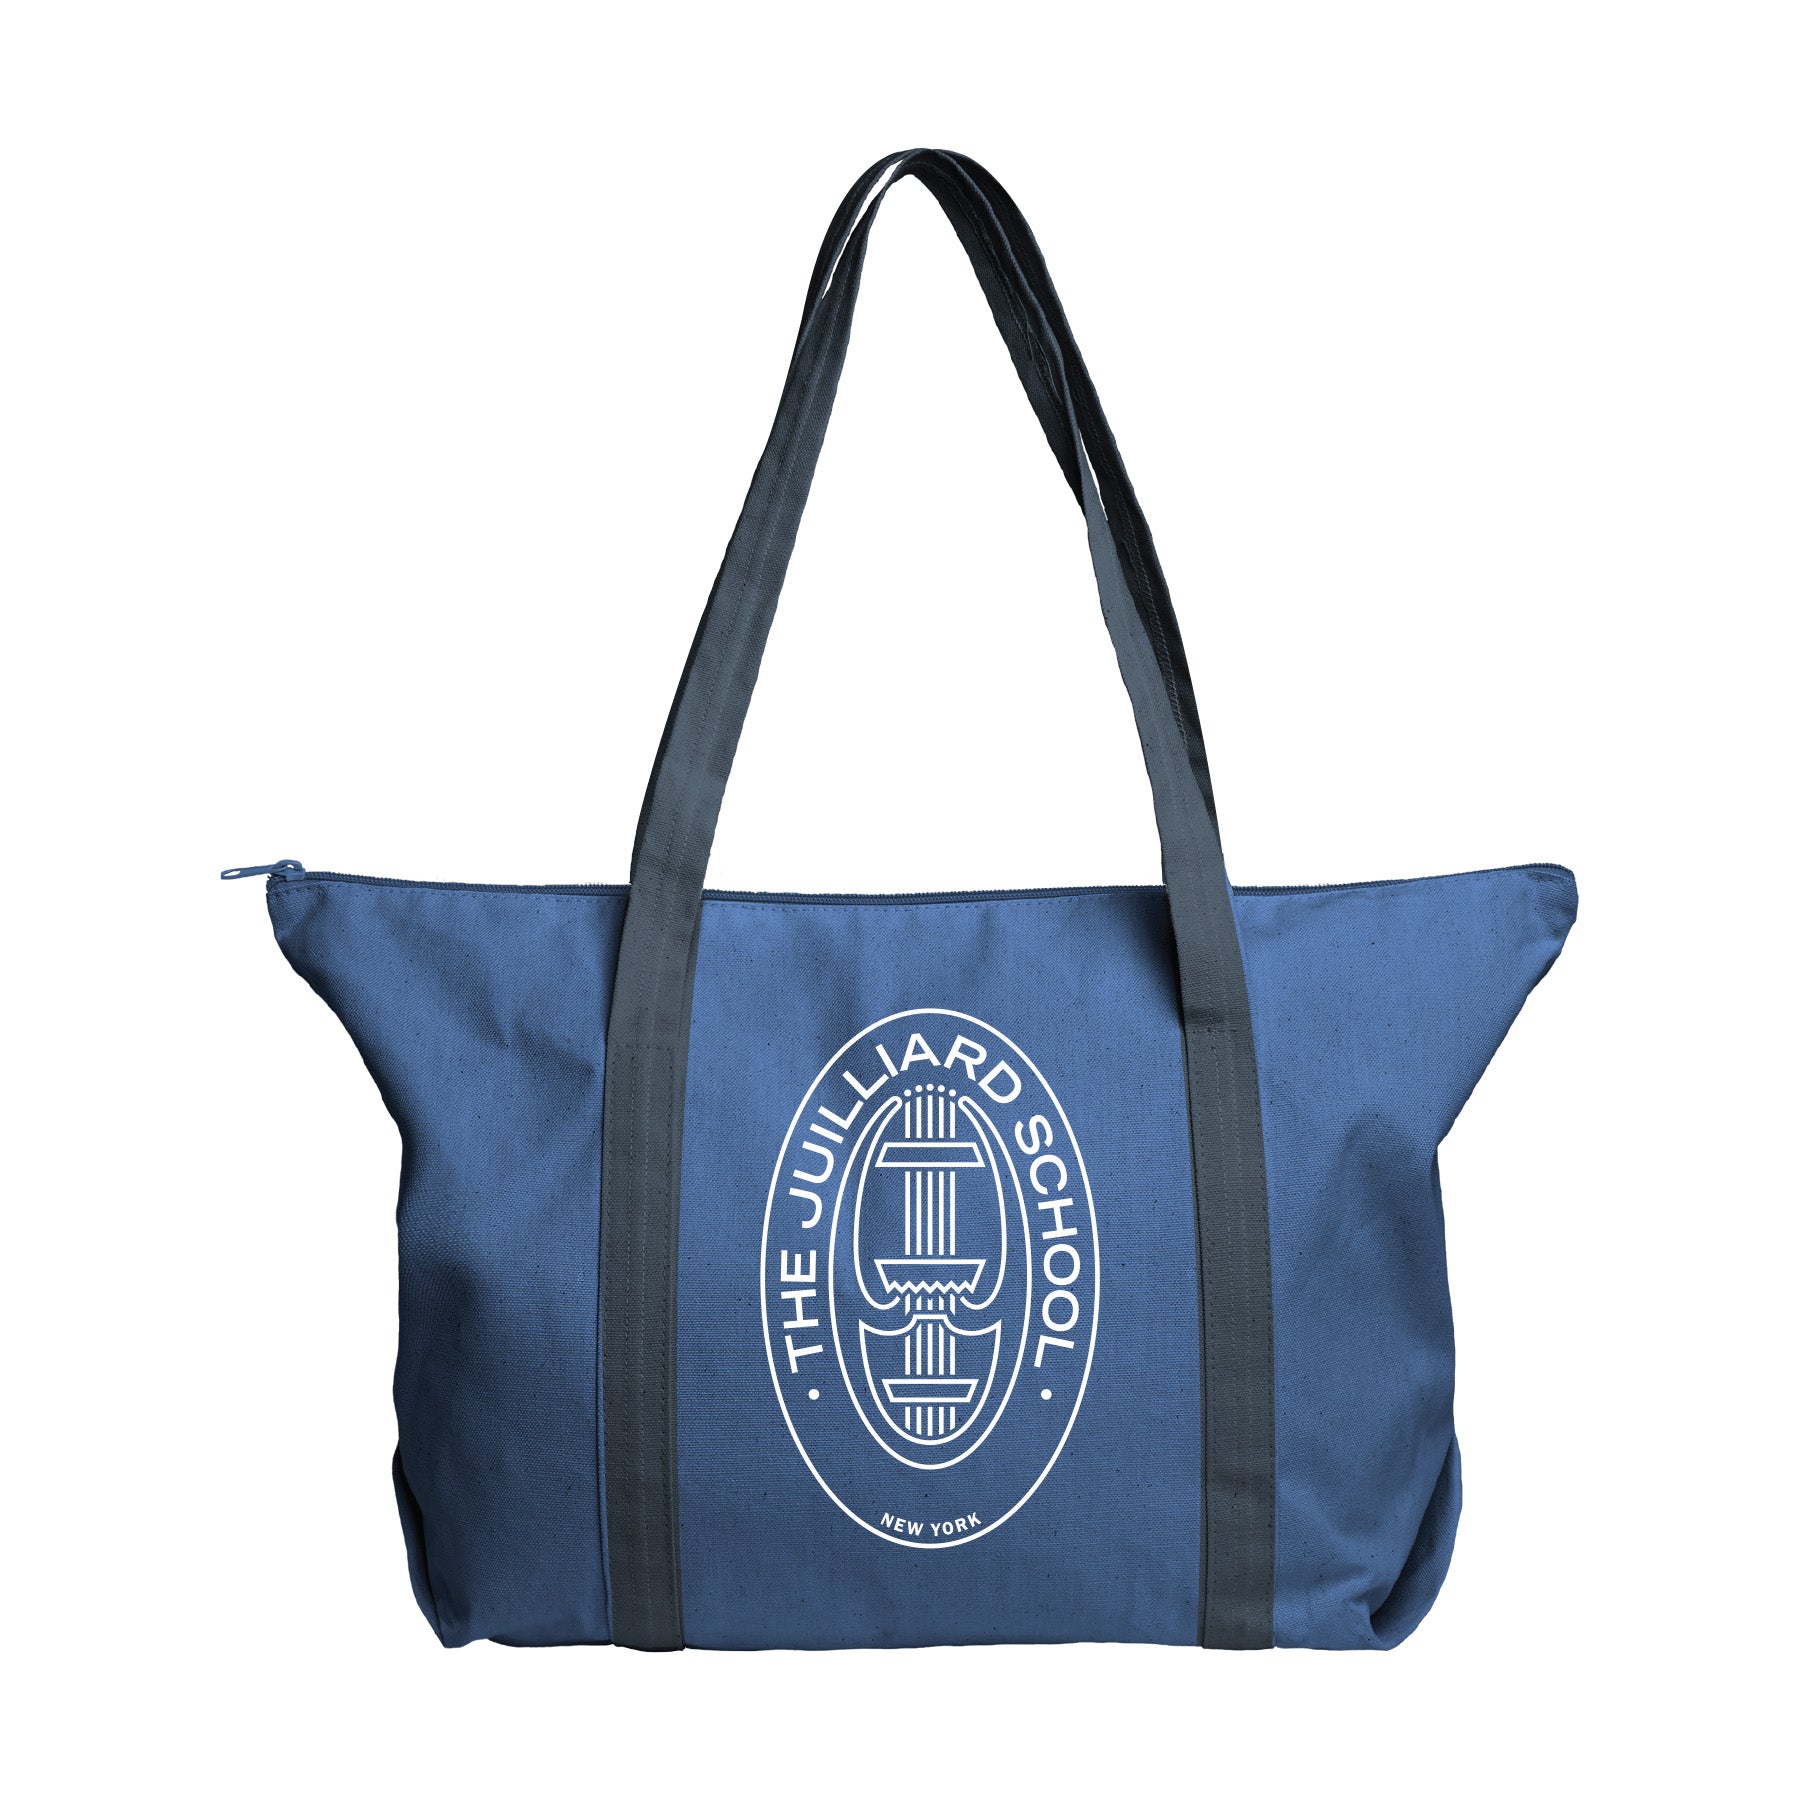 Tote bag: Juilliard Canvas Zippered tote with seal logo